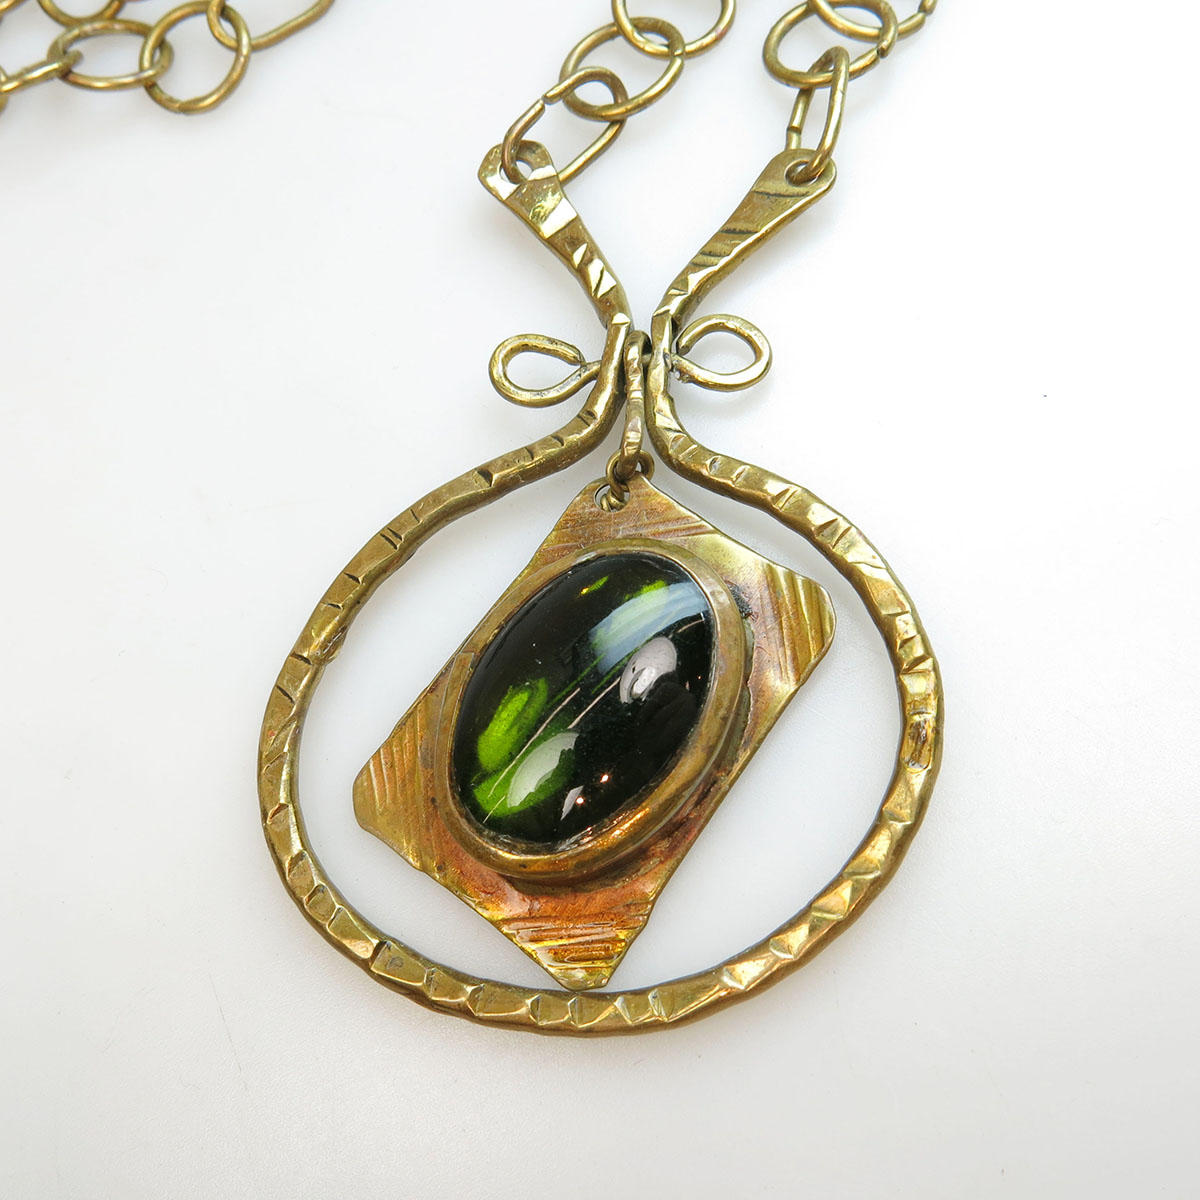 Rafael Alfandary Canadian Brass And Glass Chain And Pendant